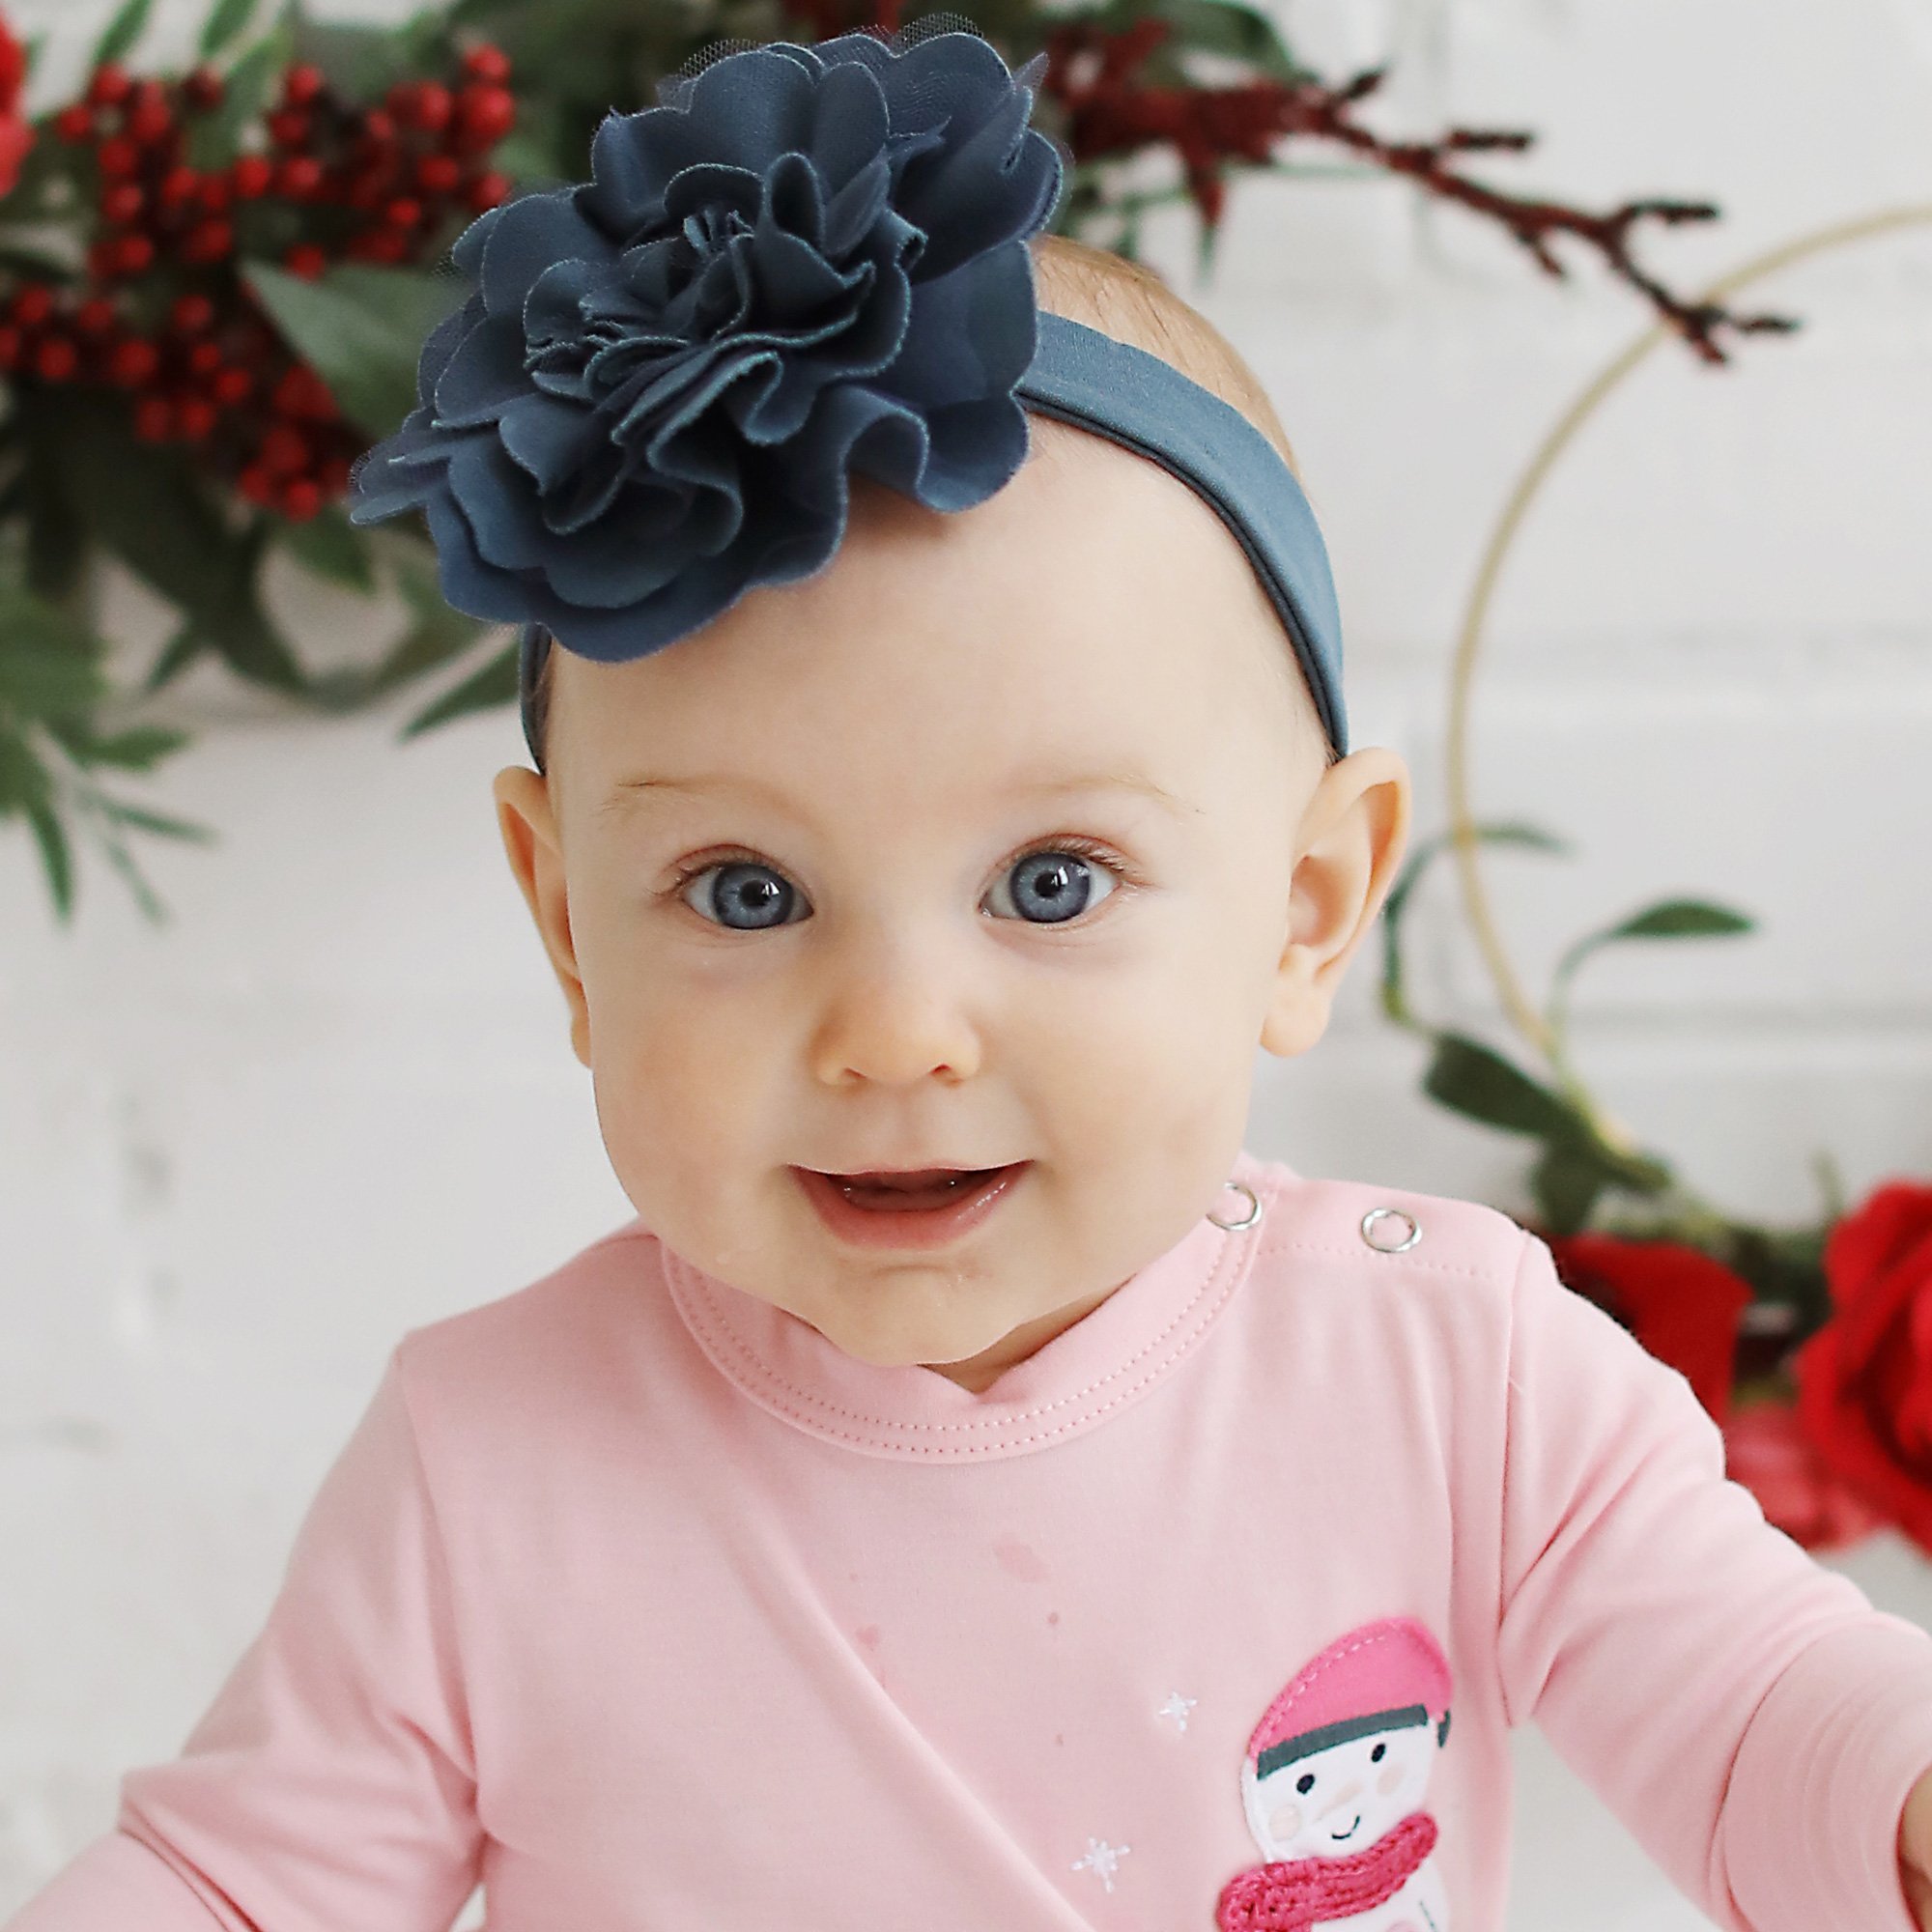 Lemon Loves Layette Lily Pad Headband for Baby Girls in Orion Blue